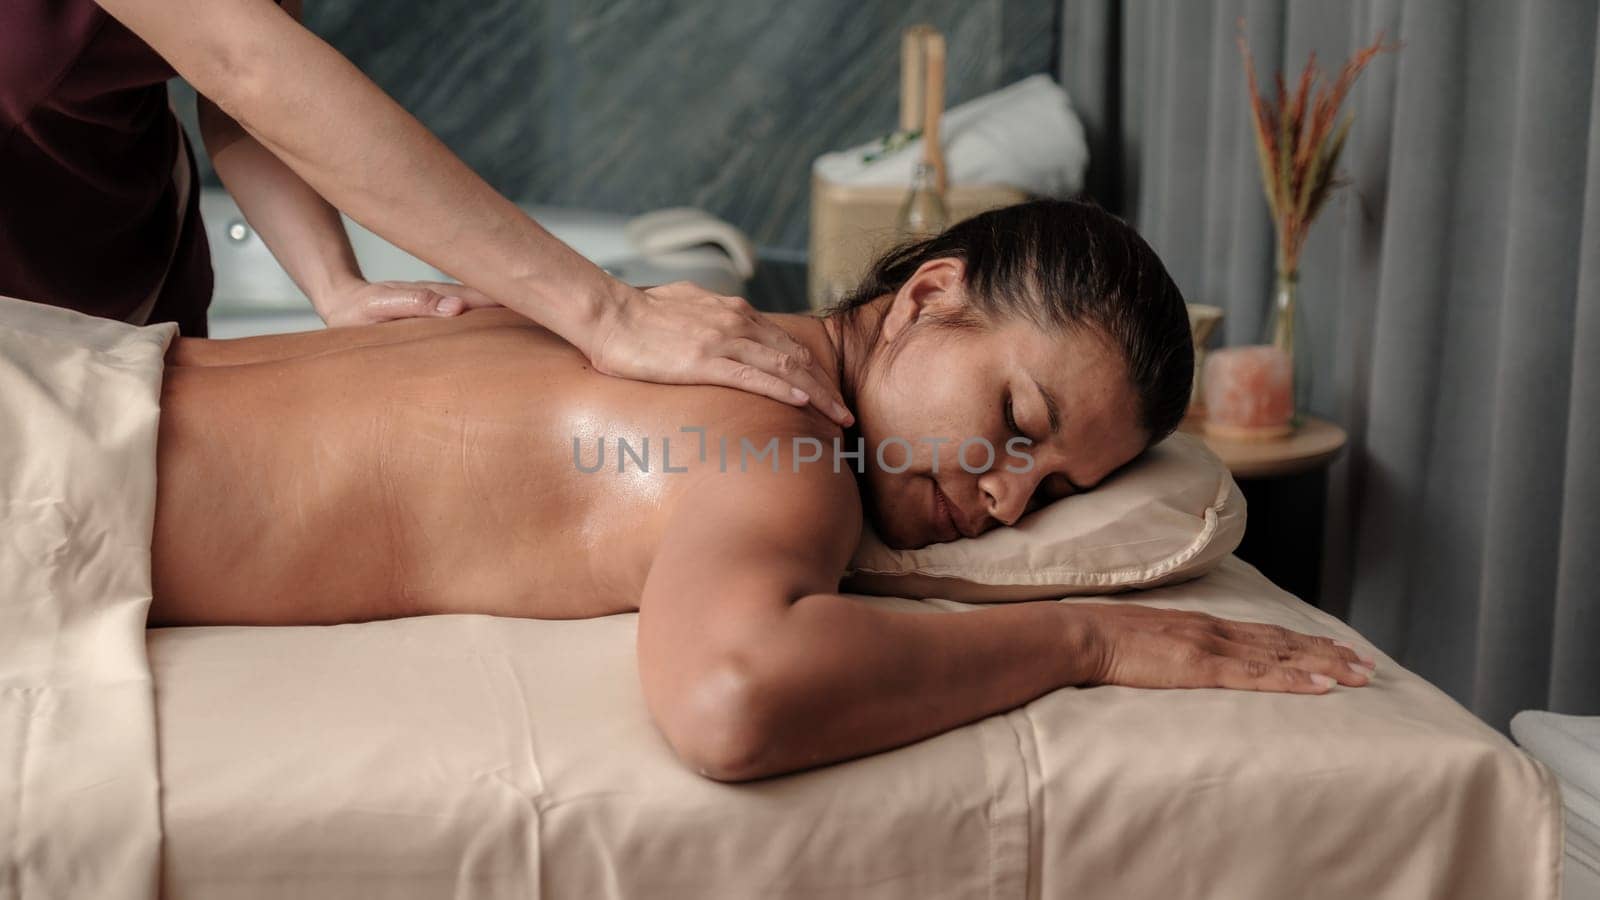 Asian woman getting a Thai massage in a Massage room in Thailand at a luxury hotel spa, close up of woman hands giving a massage